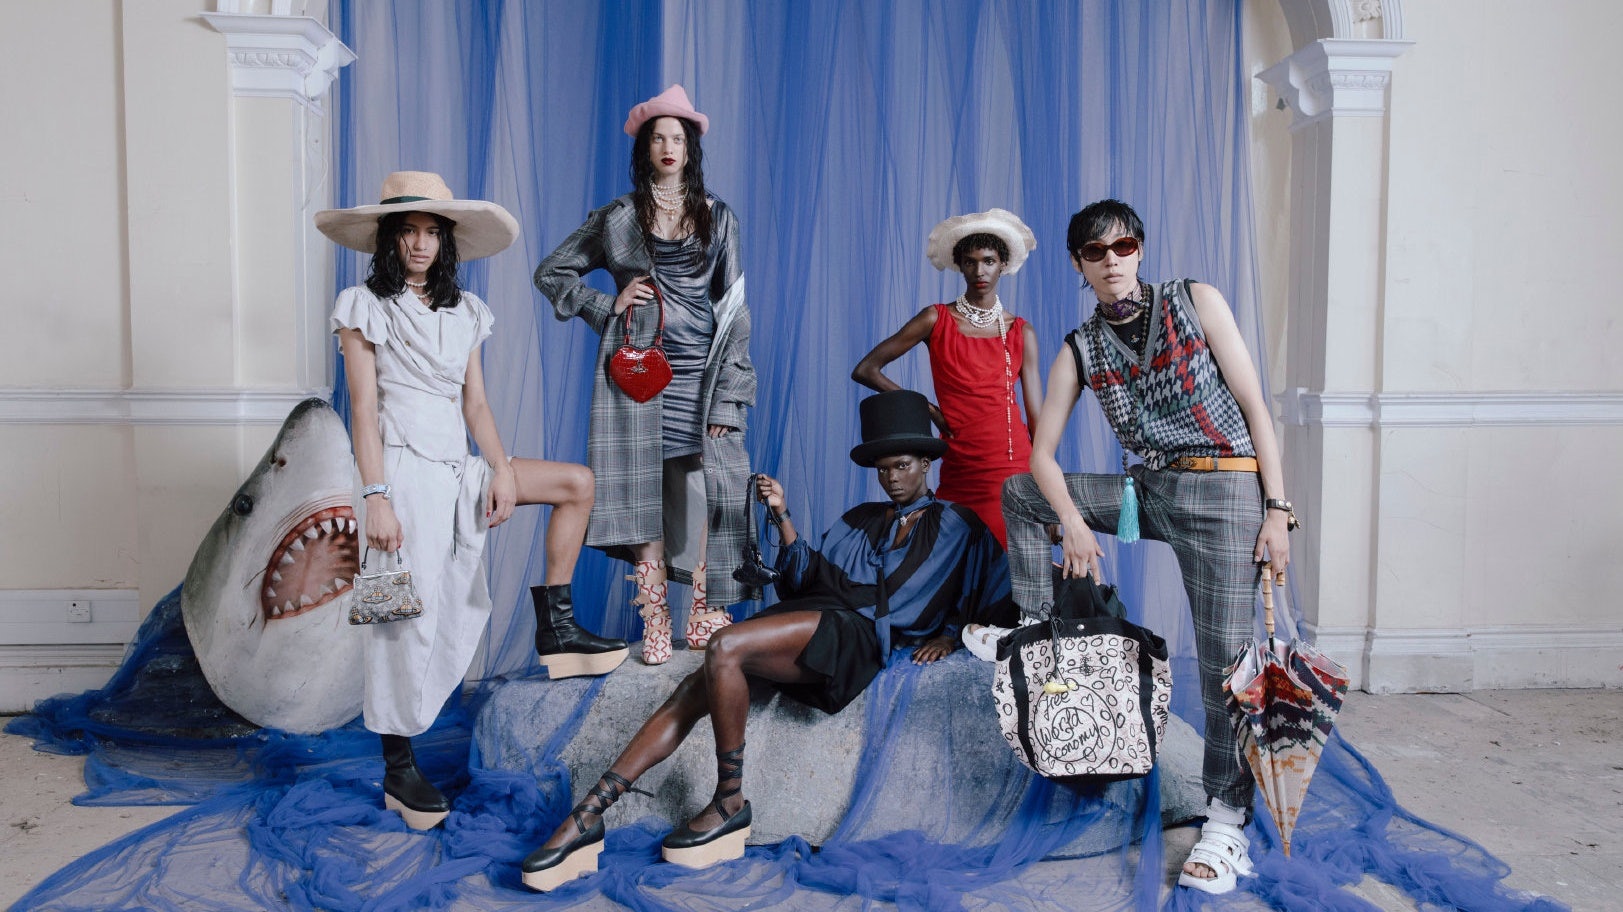 Jing Daily can exclusively announce that British avant-garde label Vivienne Westwood is adding two new flagship stores to further expand its footprint in China this year. Photo: Shutterstock